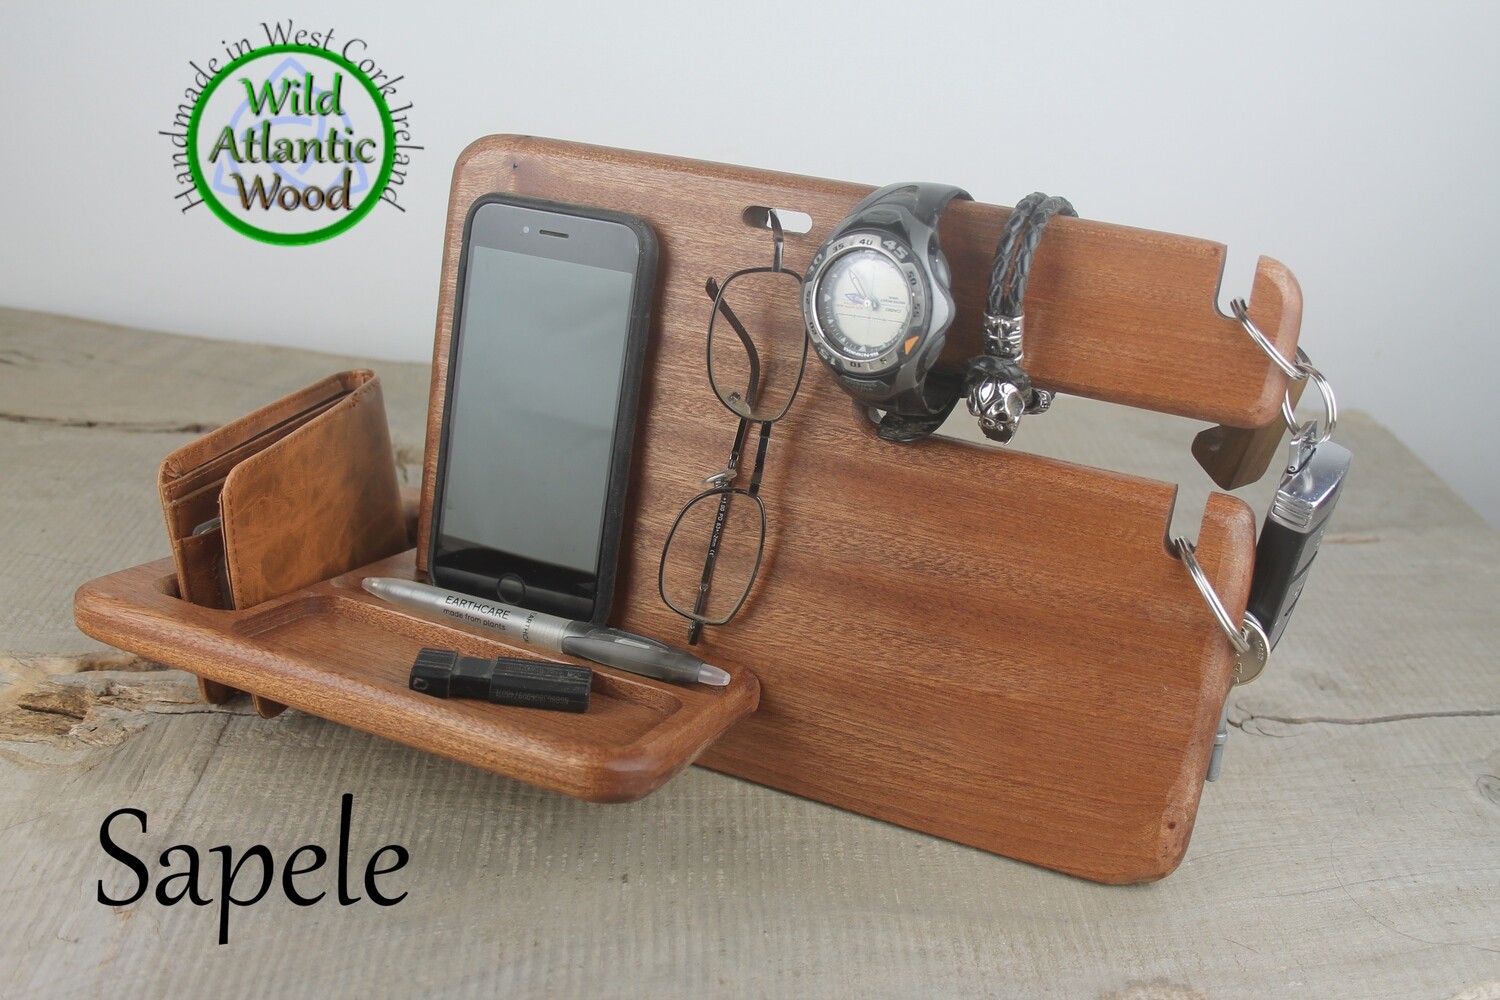 Sapele Desk Organizer, Phone Stand, and Charging Station